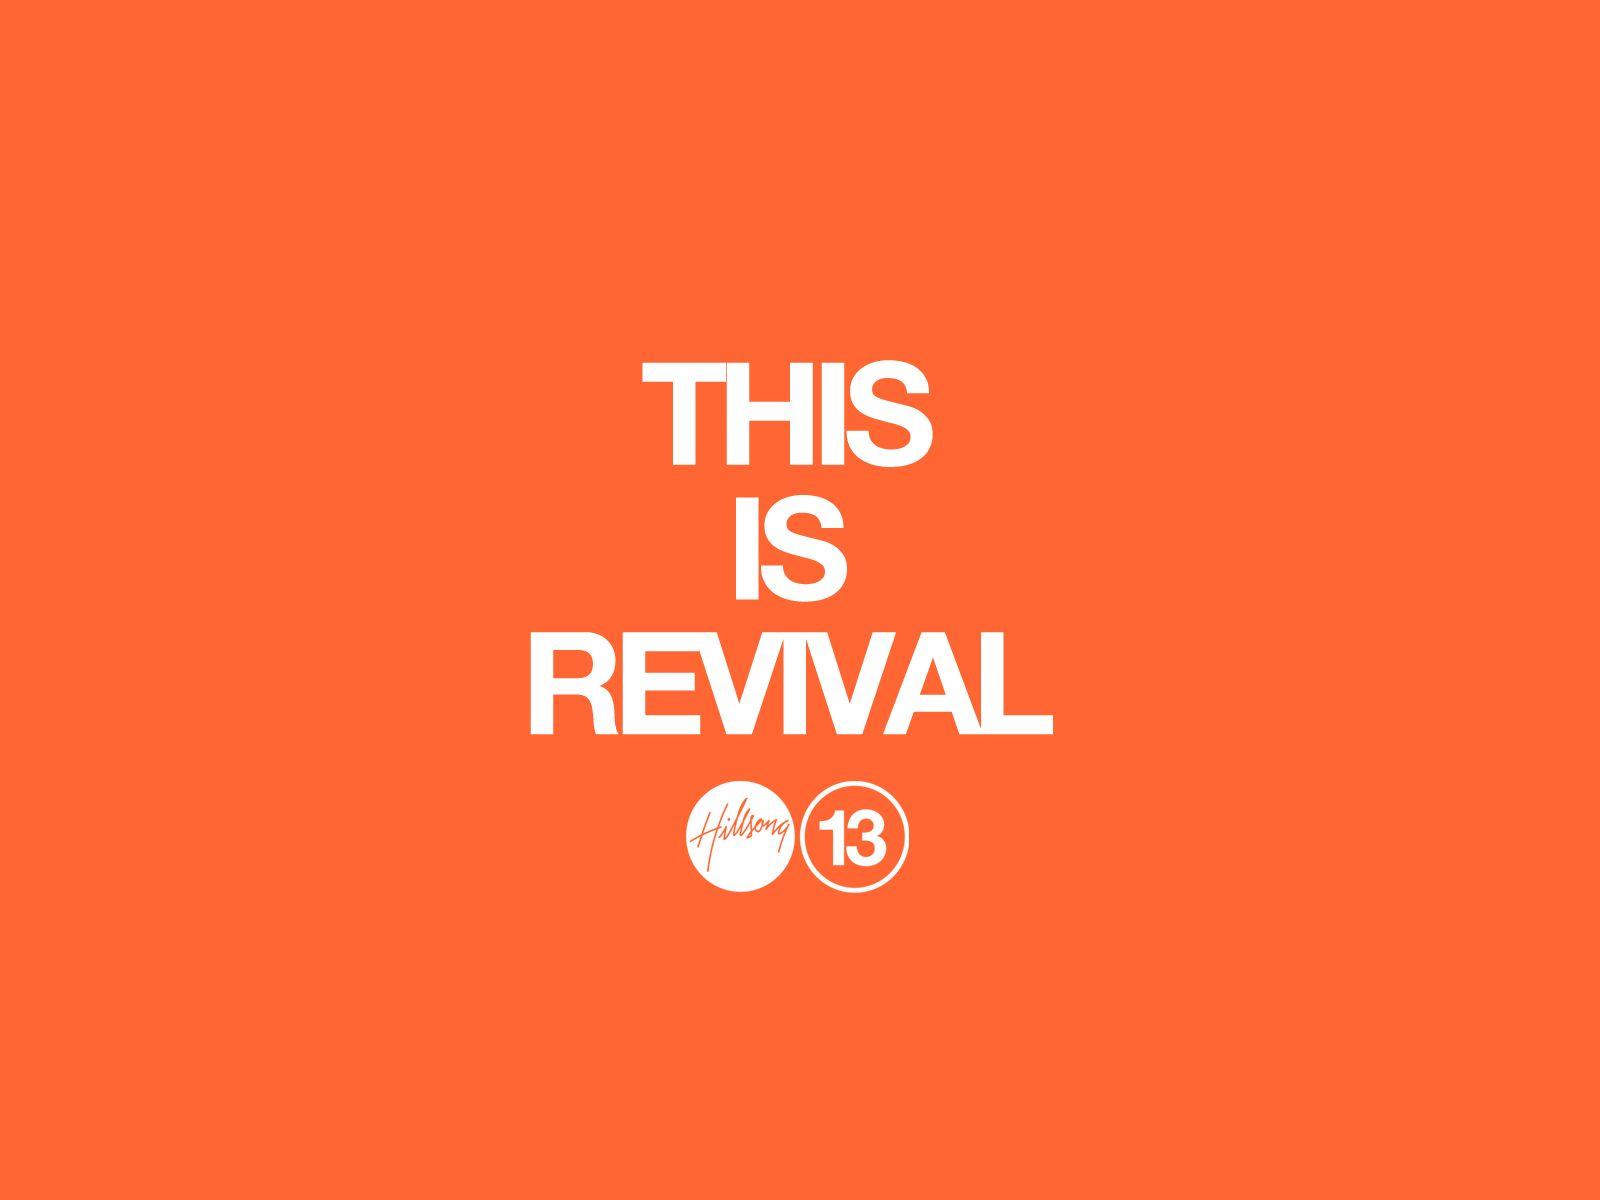 Desktop Wallpaper - Hillsong Conference 2013. This is Revival